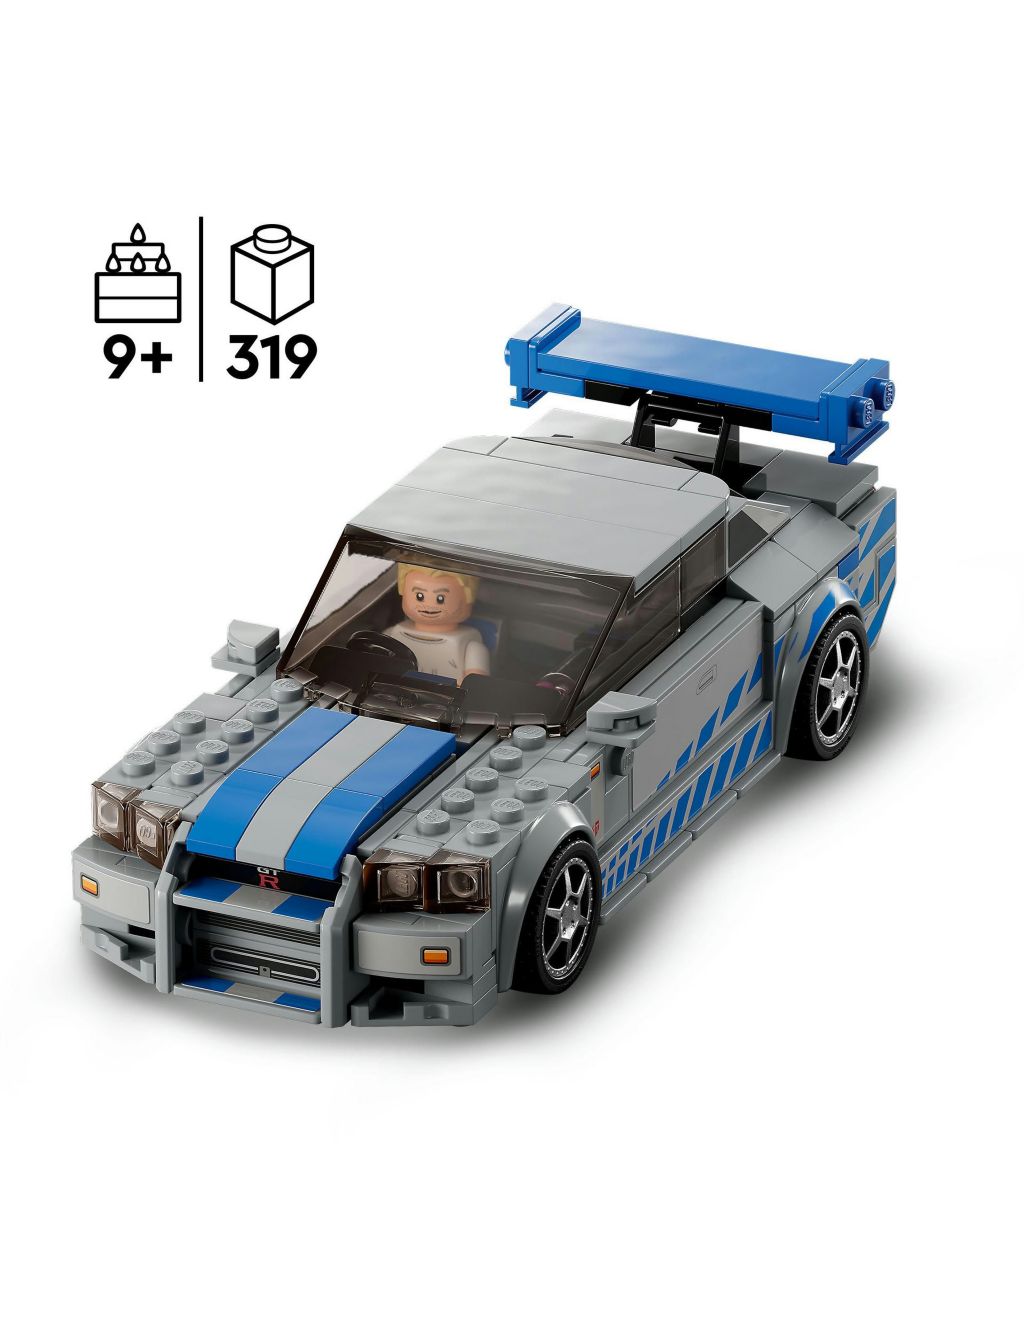 LEGO Speed Champions 2 Fast 2 Furious Nissan Skyline (9+ Yrs) 1 of 7